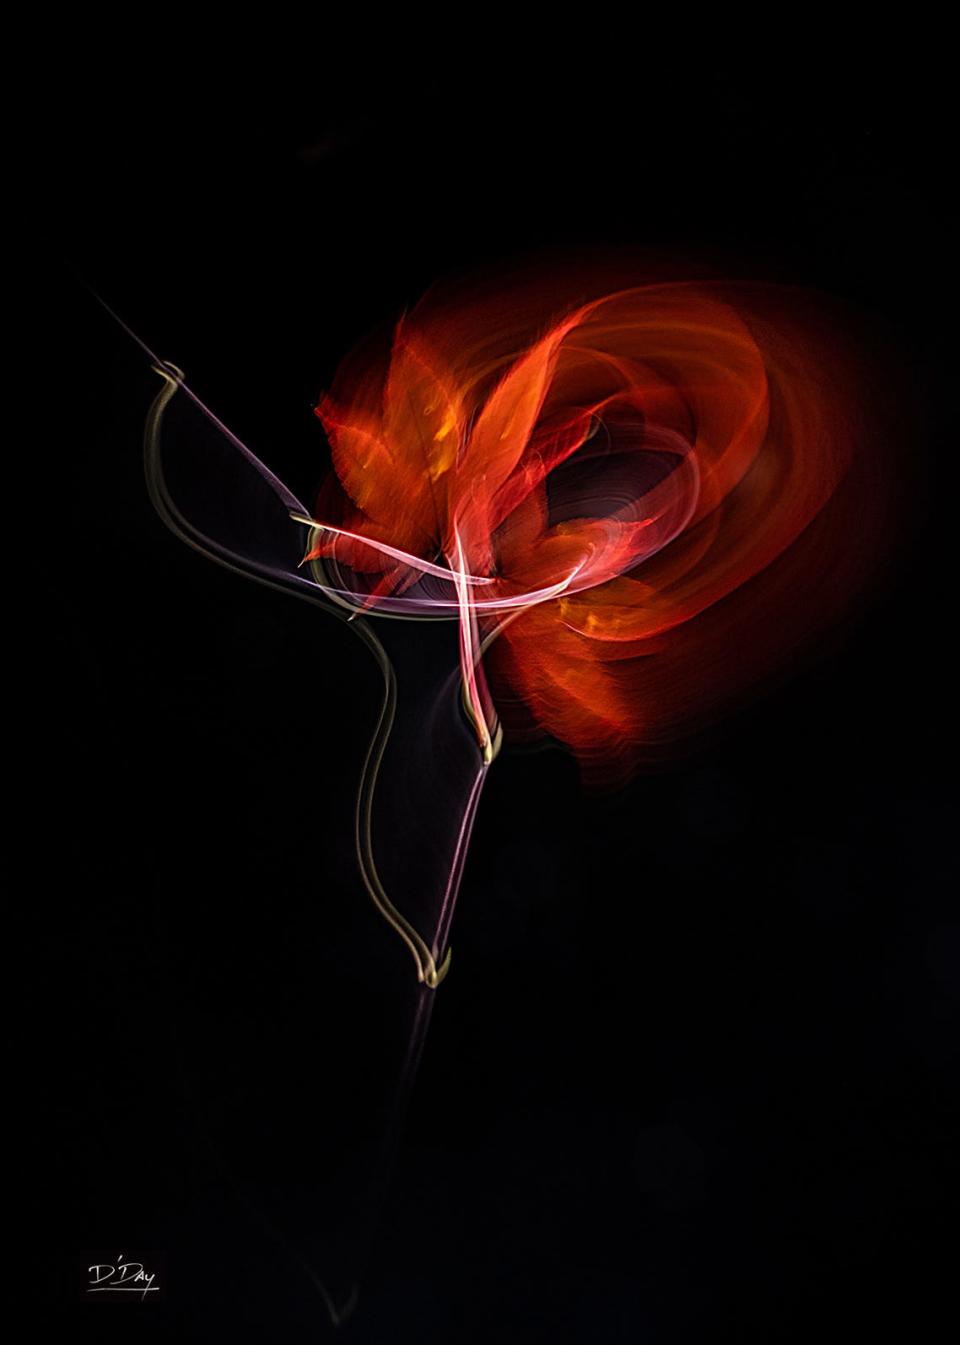 This image was created with a Japanese Maple Leaf and stem.